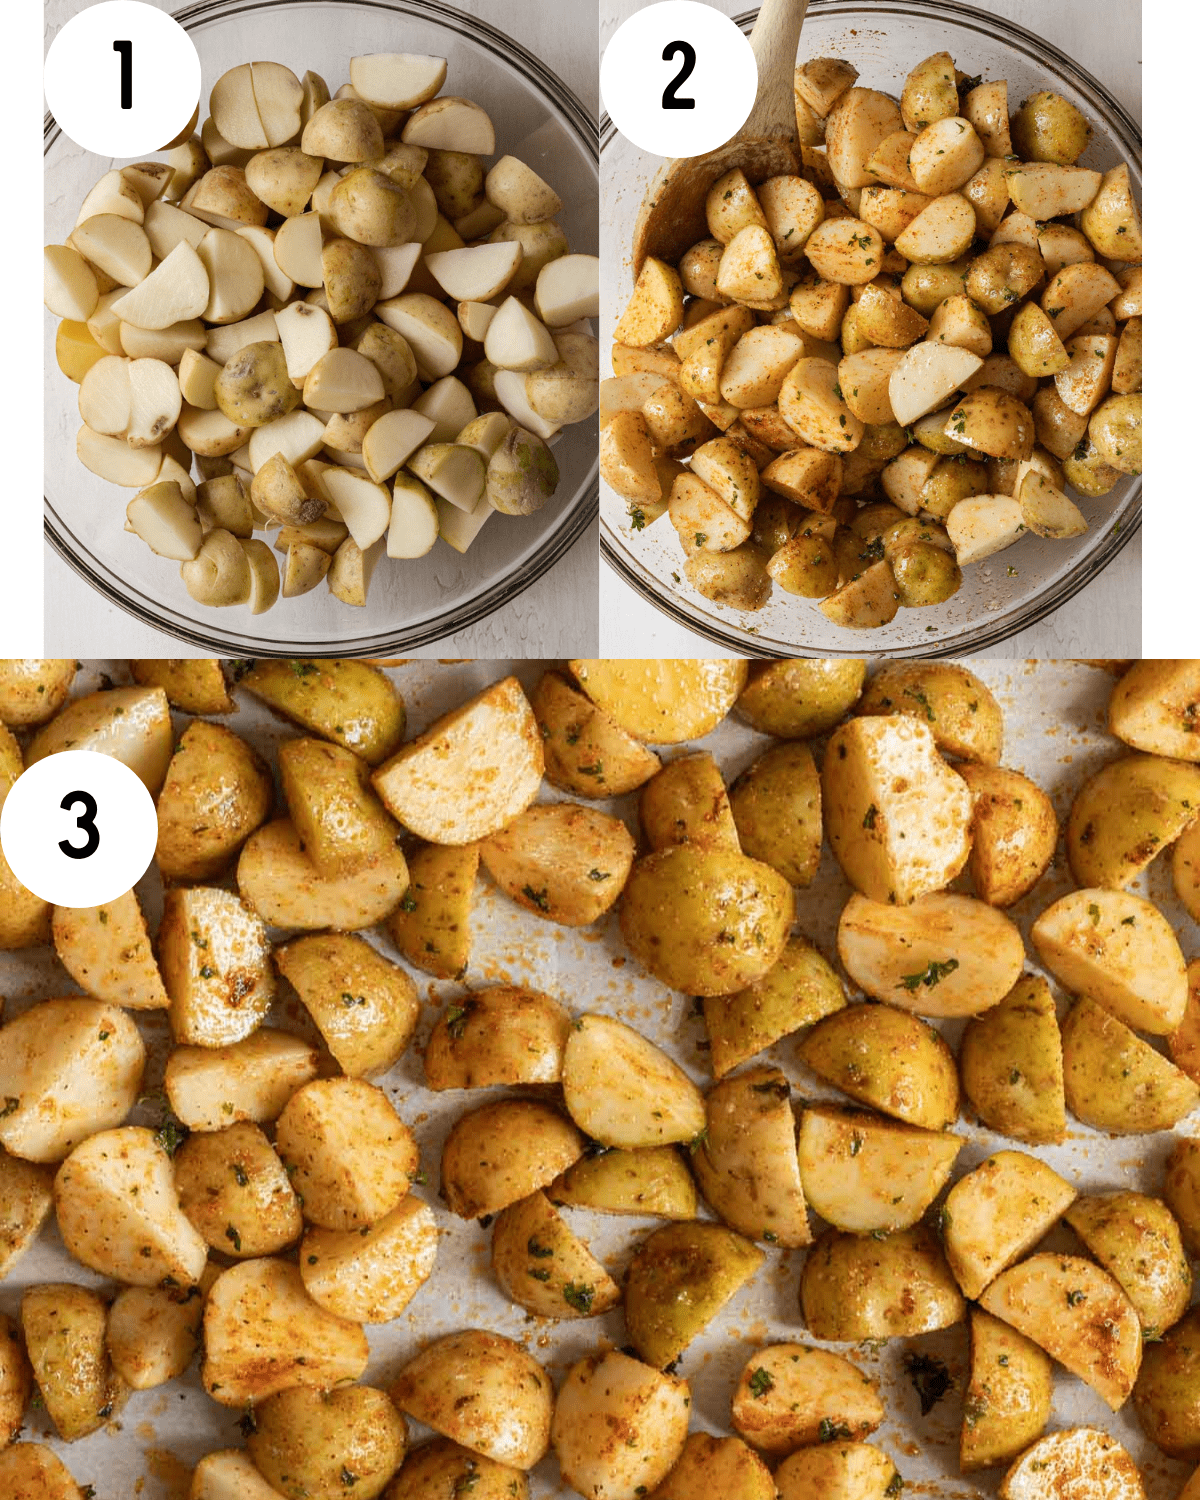 step by step process. 1- cubed potatoes in a clear glass bowl. 2- seasoned potatoes in a clear glass bowl. 3- potatoes spread out on a baking sheet.